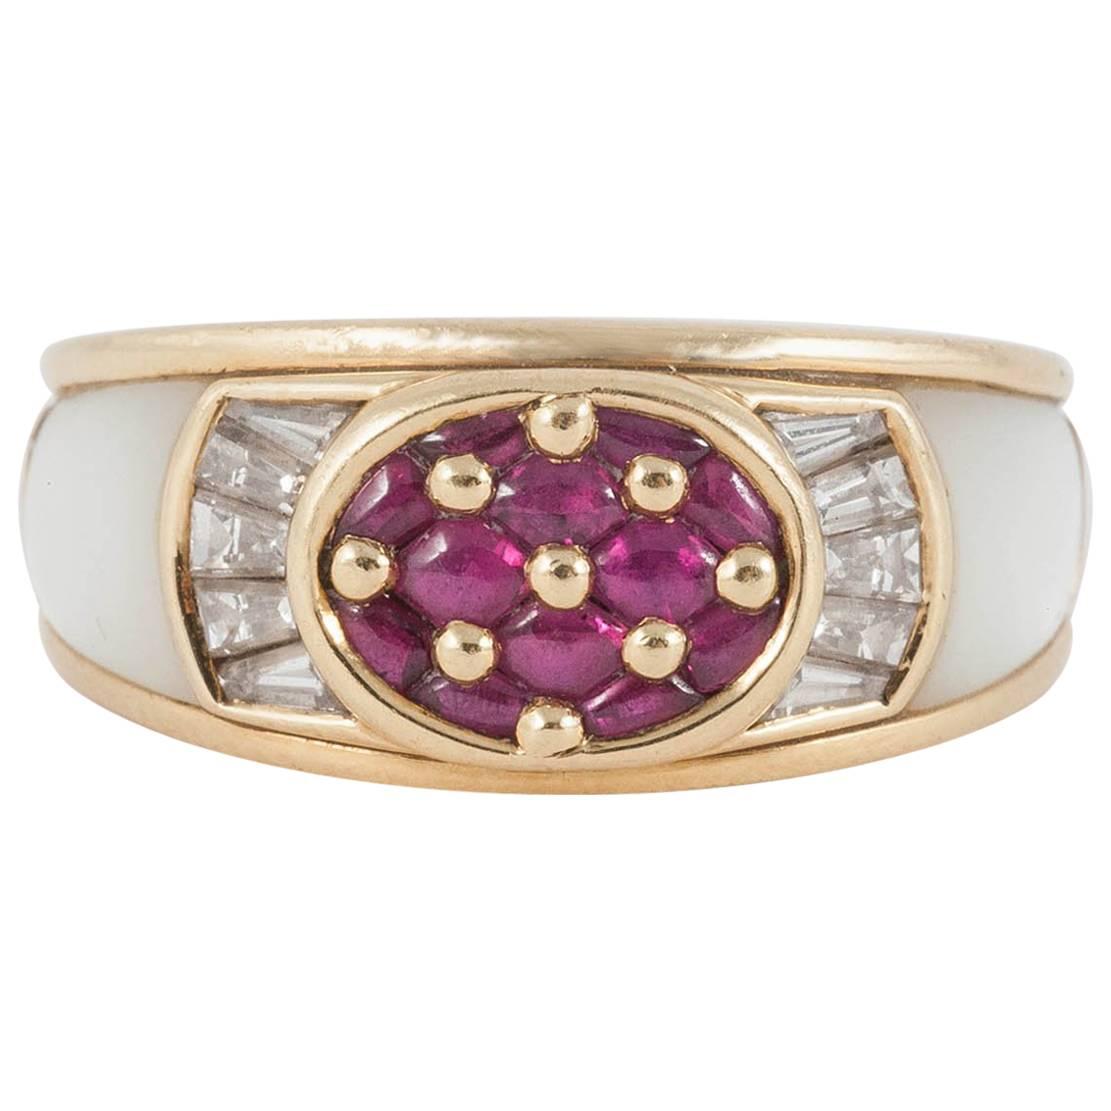 Mauboussin Paris Ruby Diamond Mother-of-Pearl Ring